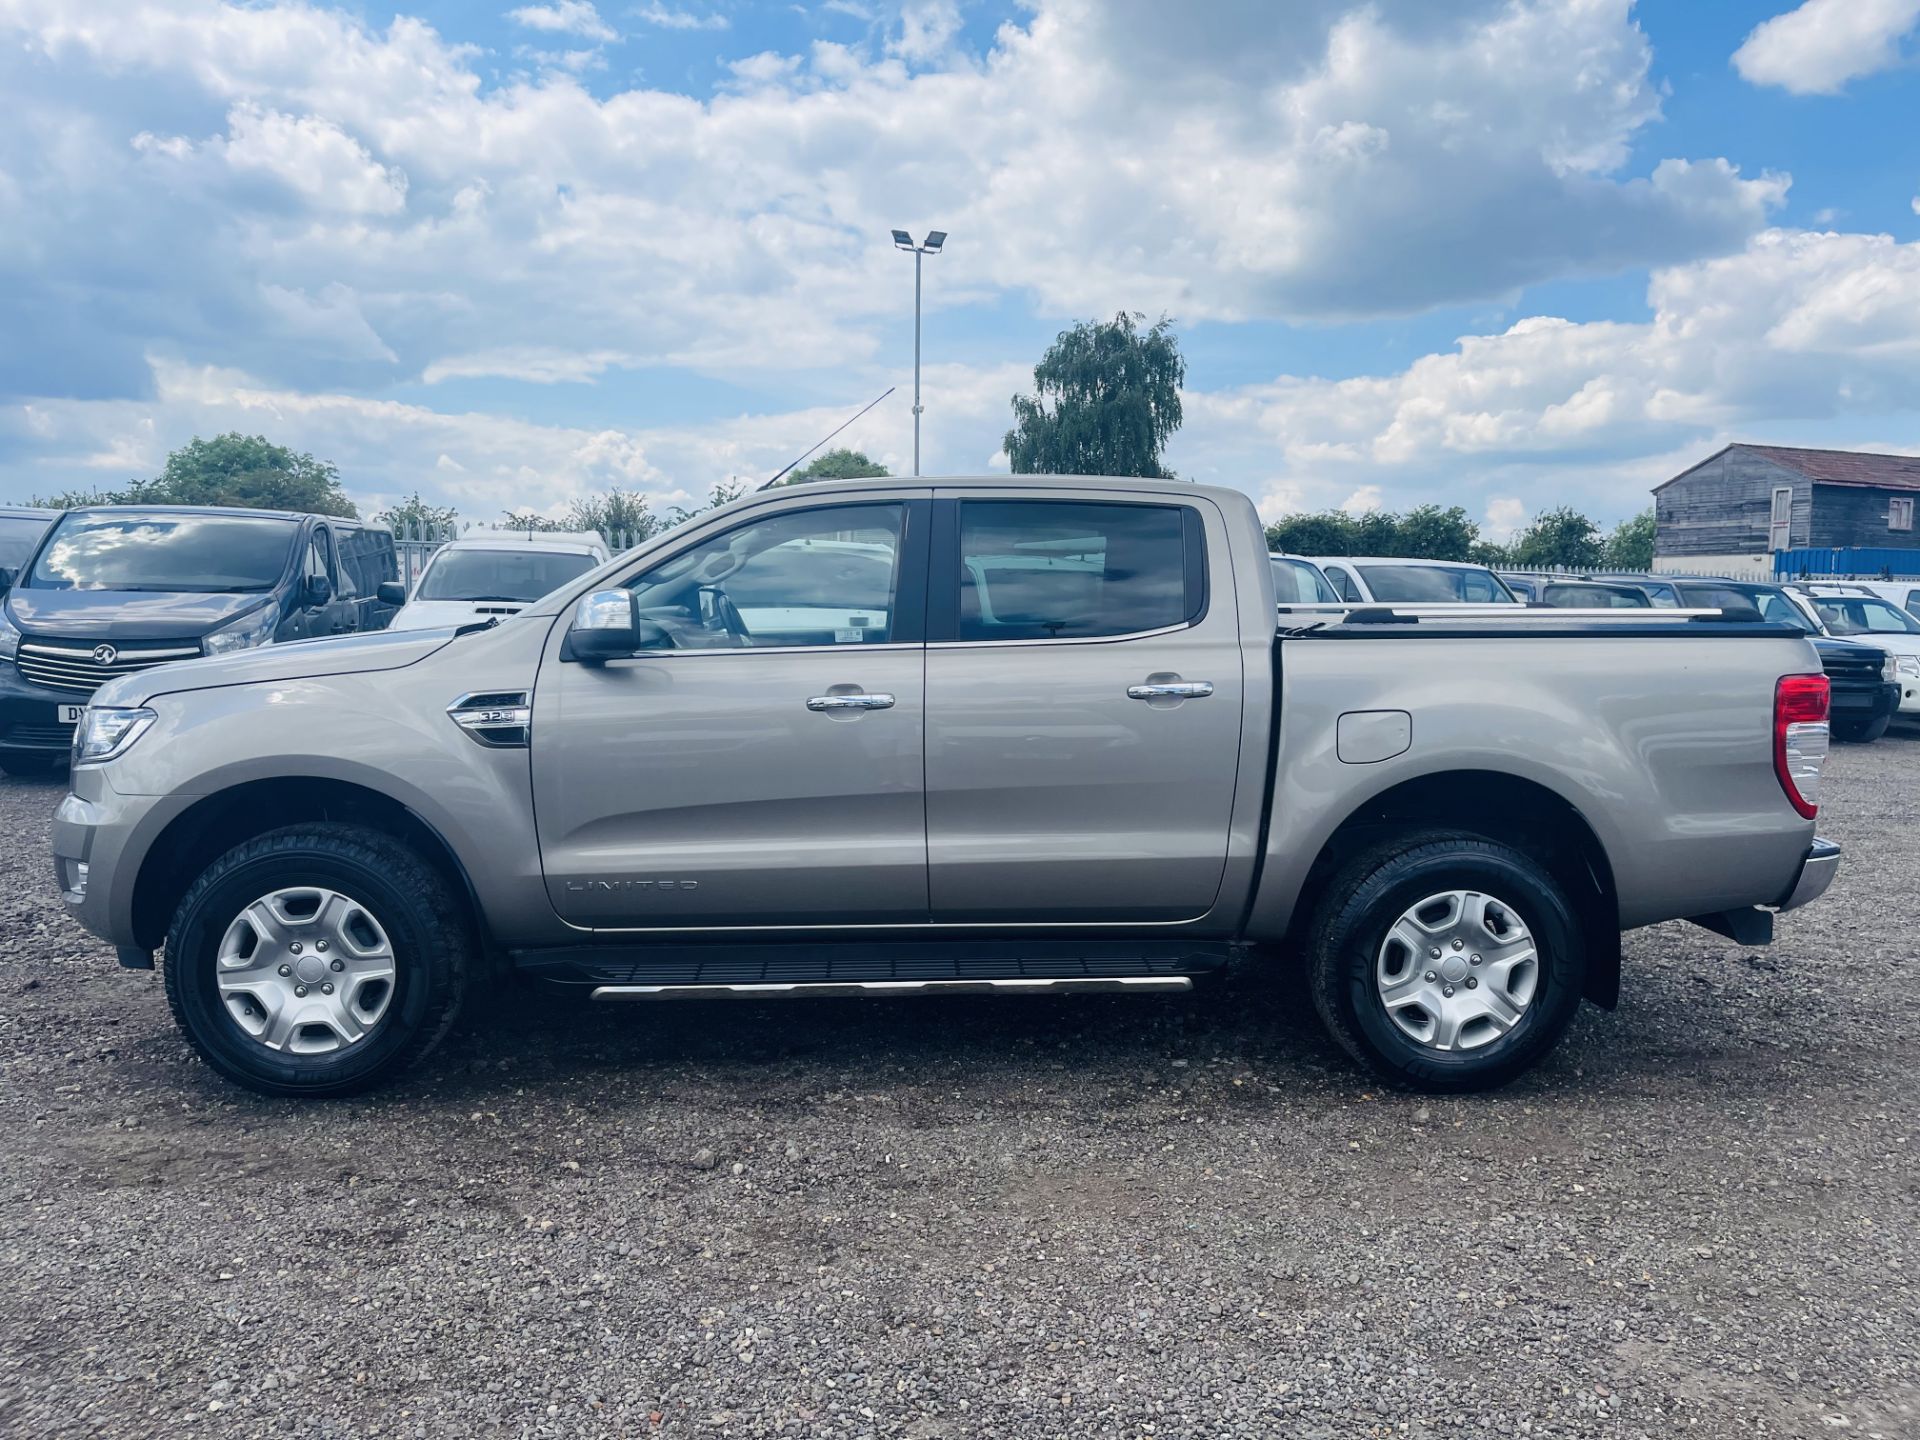 ** ON SALE ** Ford Ranger 3.2 TDCI Limited 2018 '68 Reg' Auto 4WD - Sat Nav - A/C - Euro 6 - Image 8 of 35